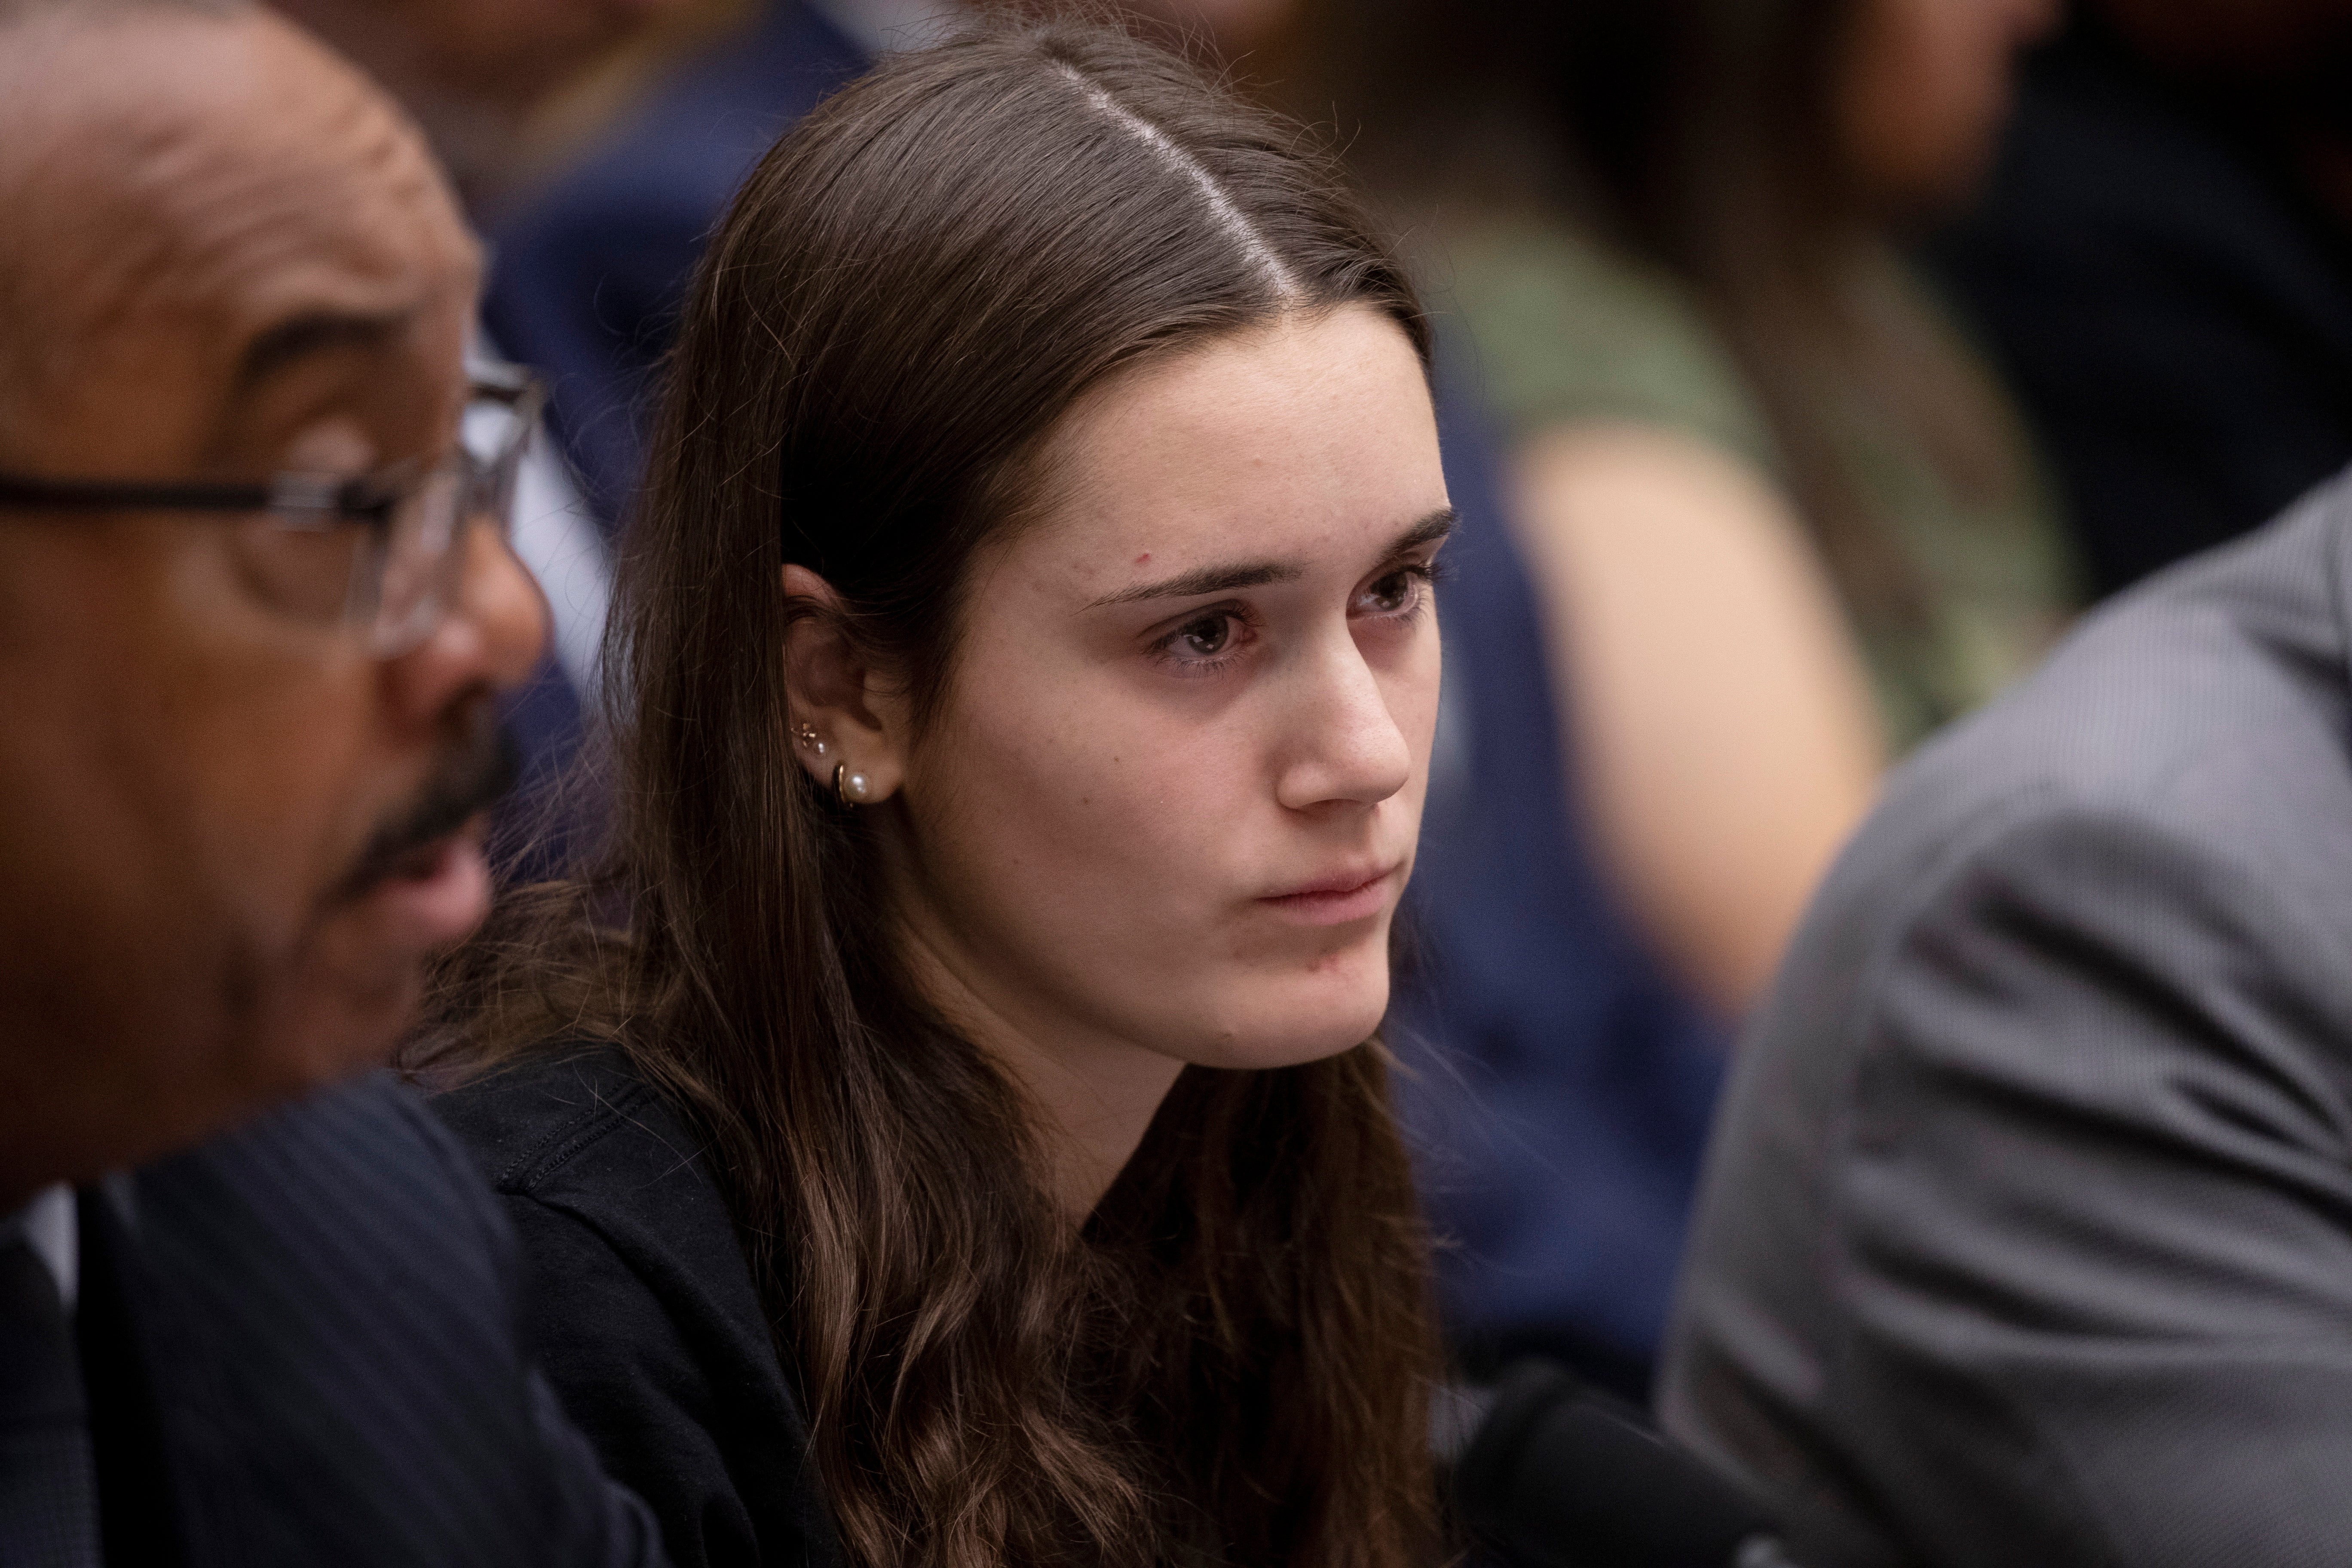 Sandy Hook Elementary School shooting survivor Nicole Melchionno testifies to the House Judiciary Committee 10 years after the massacre